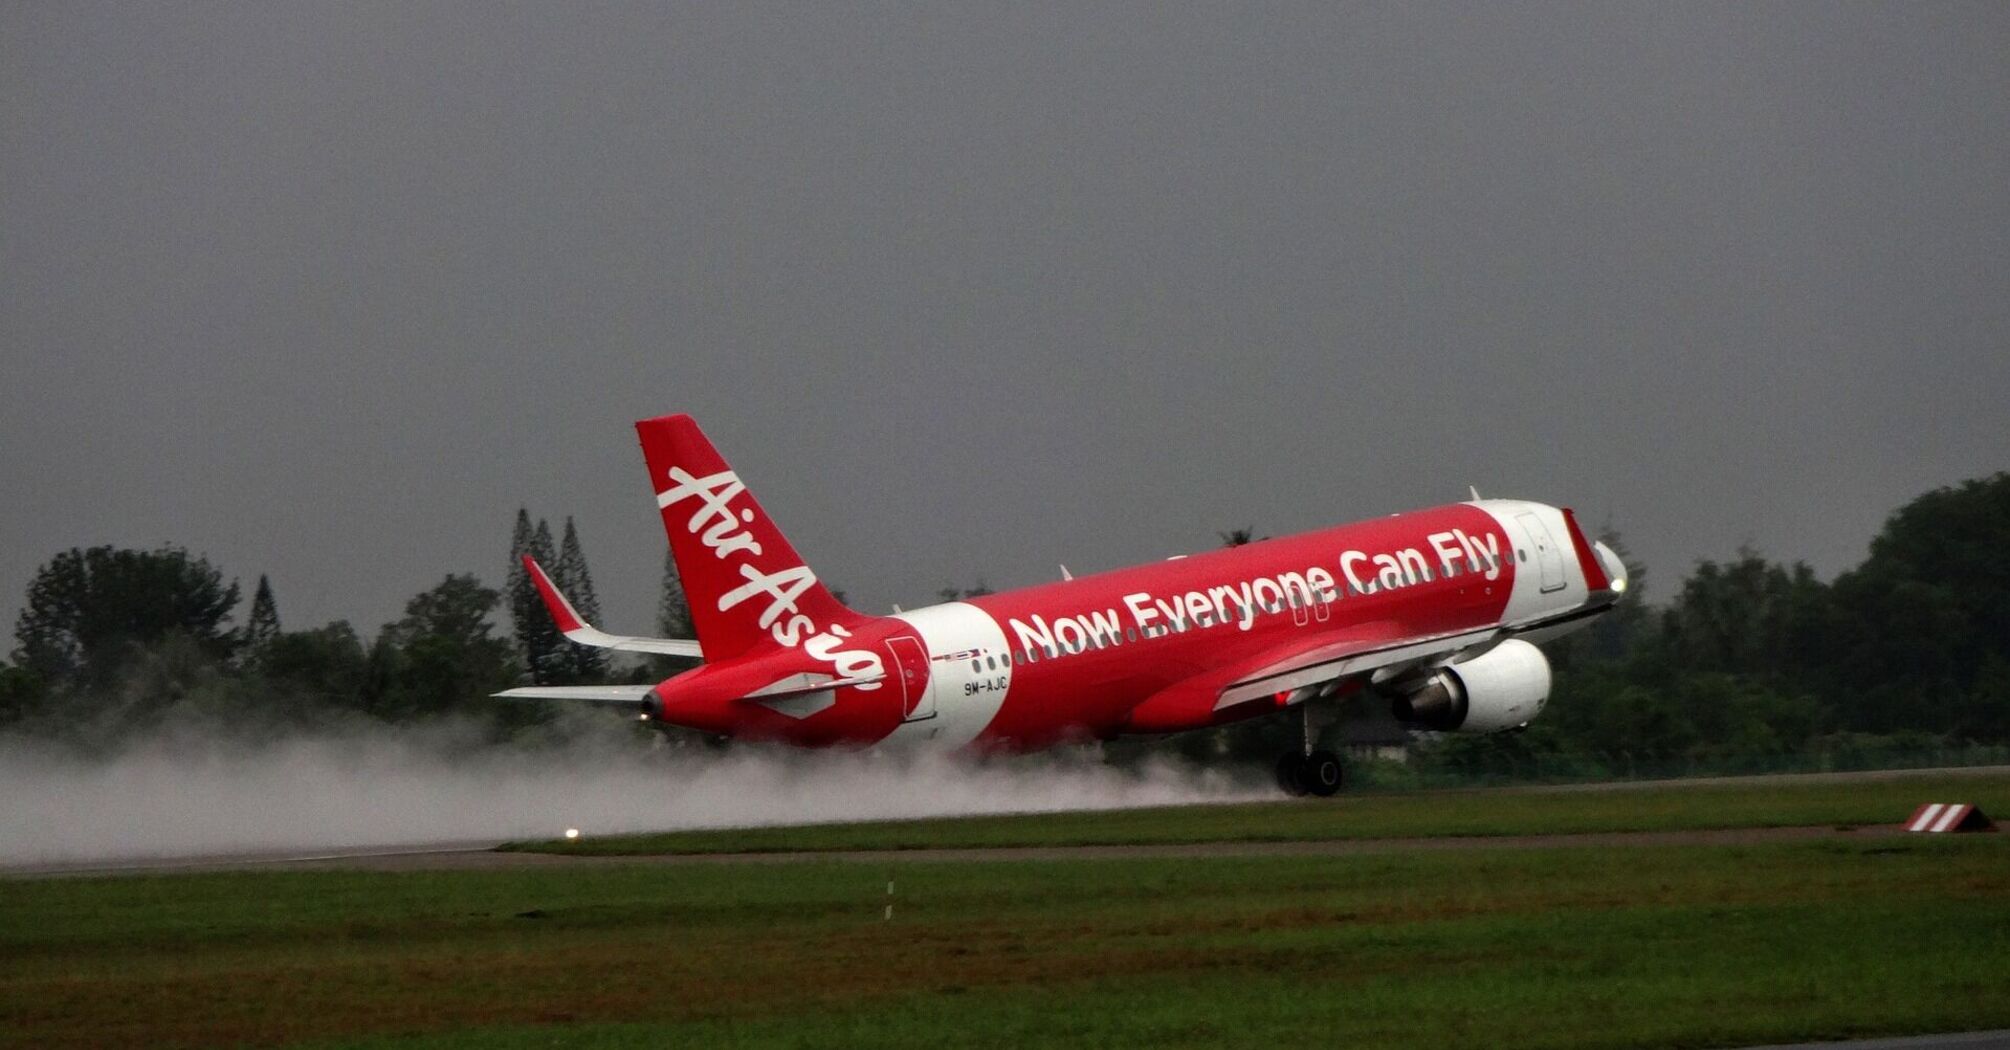 AirAsia airplane taking off on a rainy day with spray on the runway